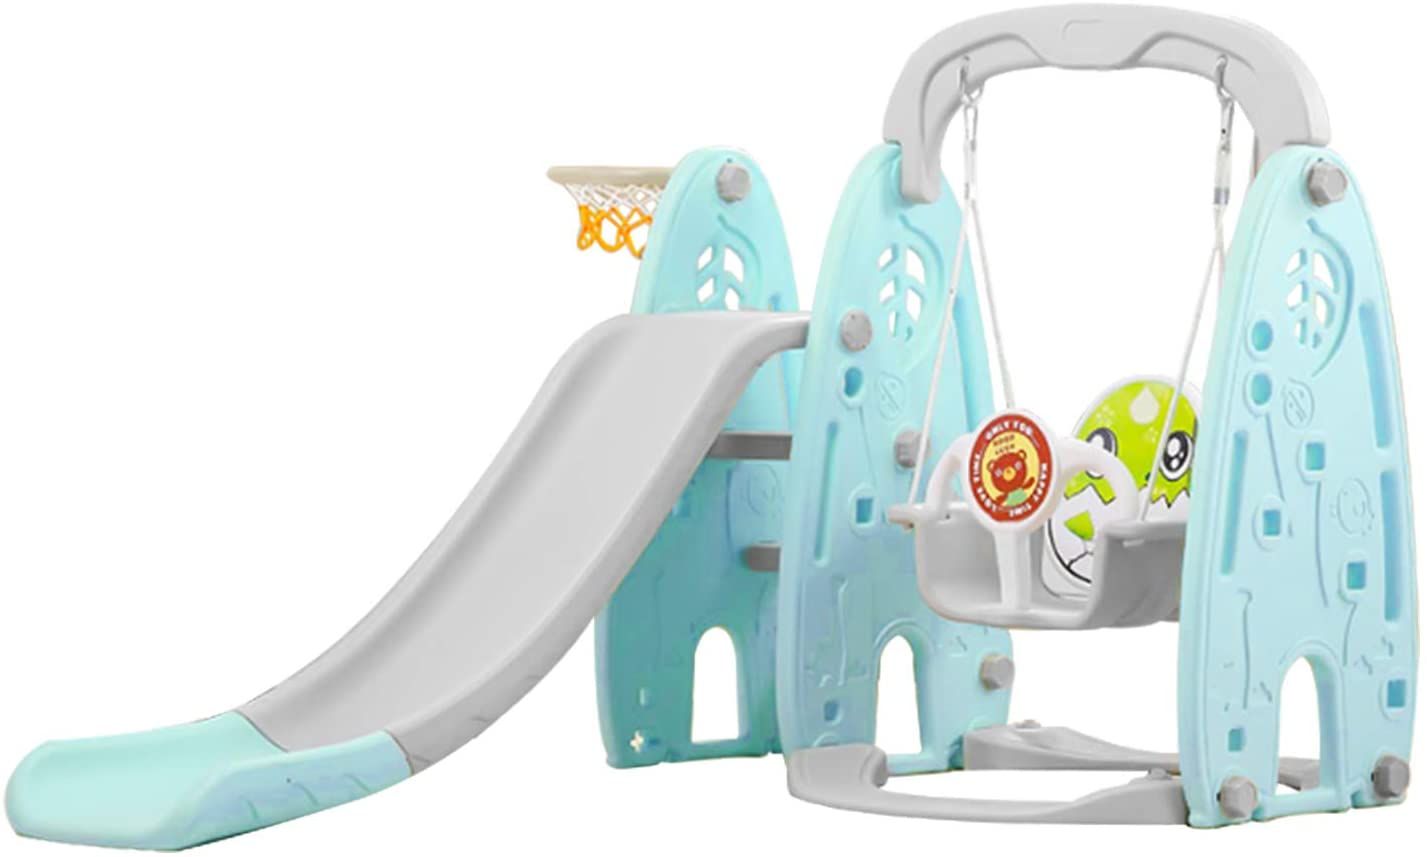 YEEGO DIRECT Climber Swing and Slide Set - $$title$$